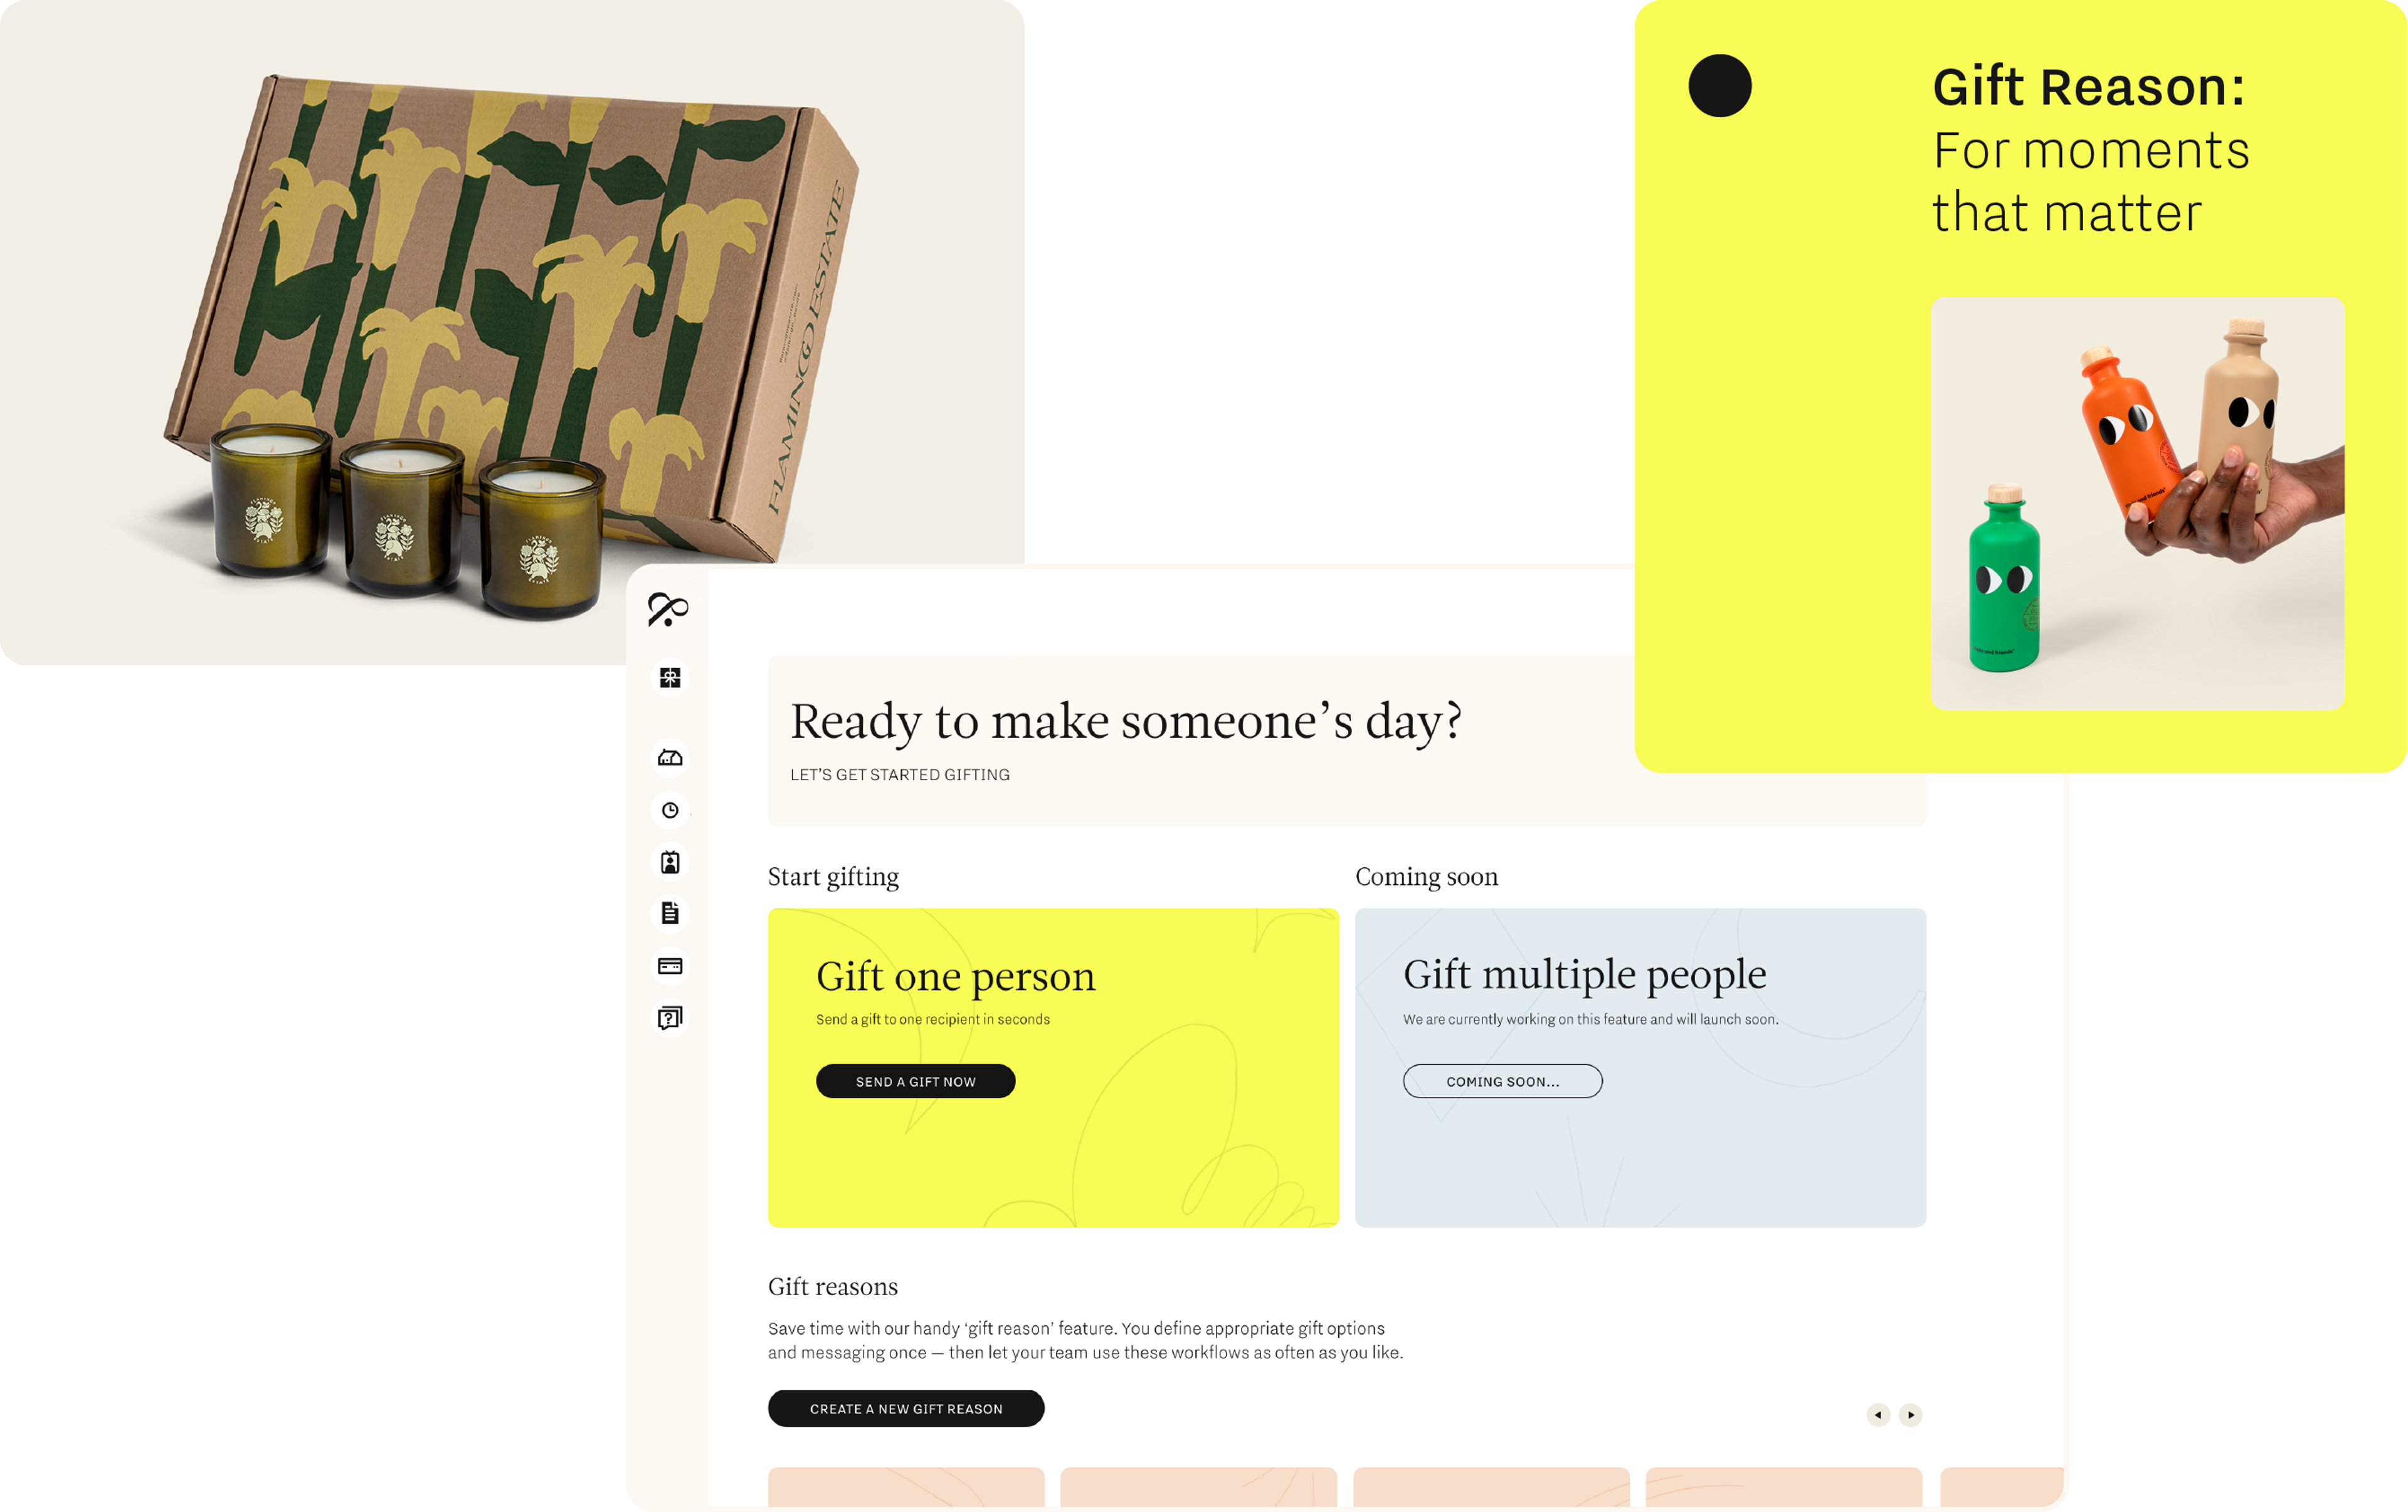 On-demand platform and gift imagery